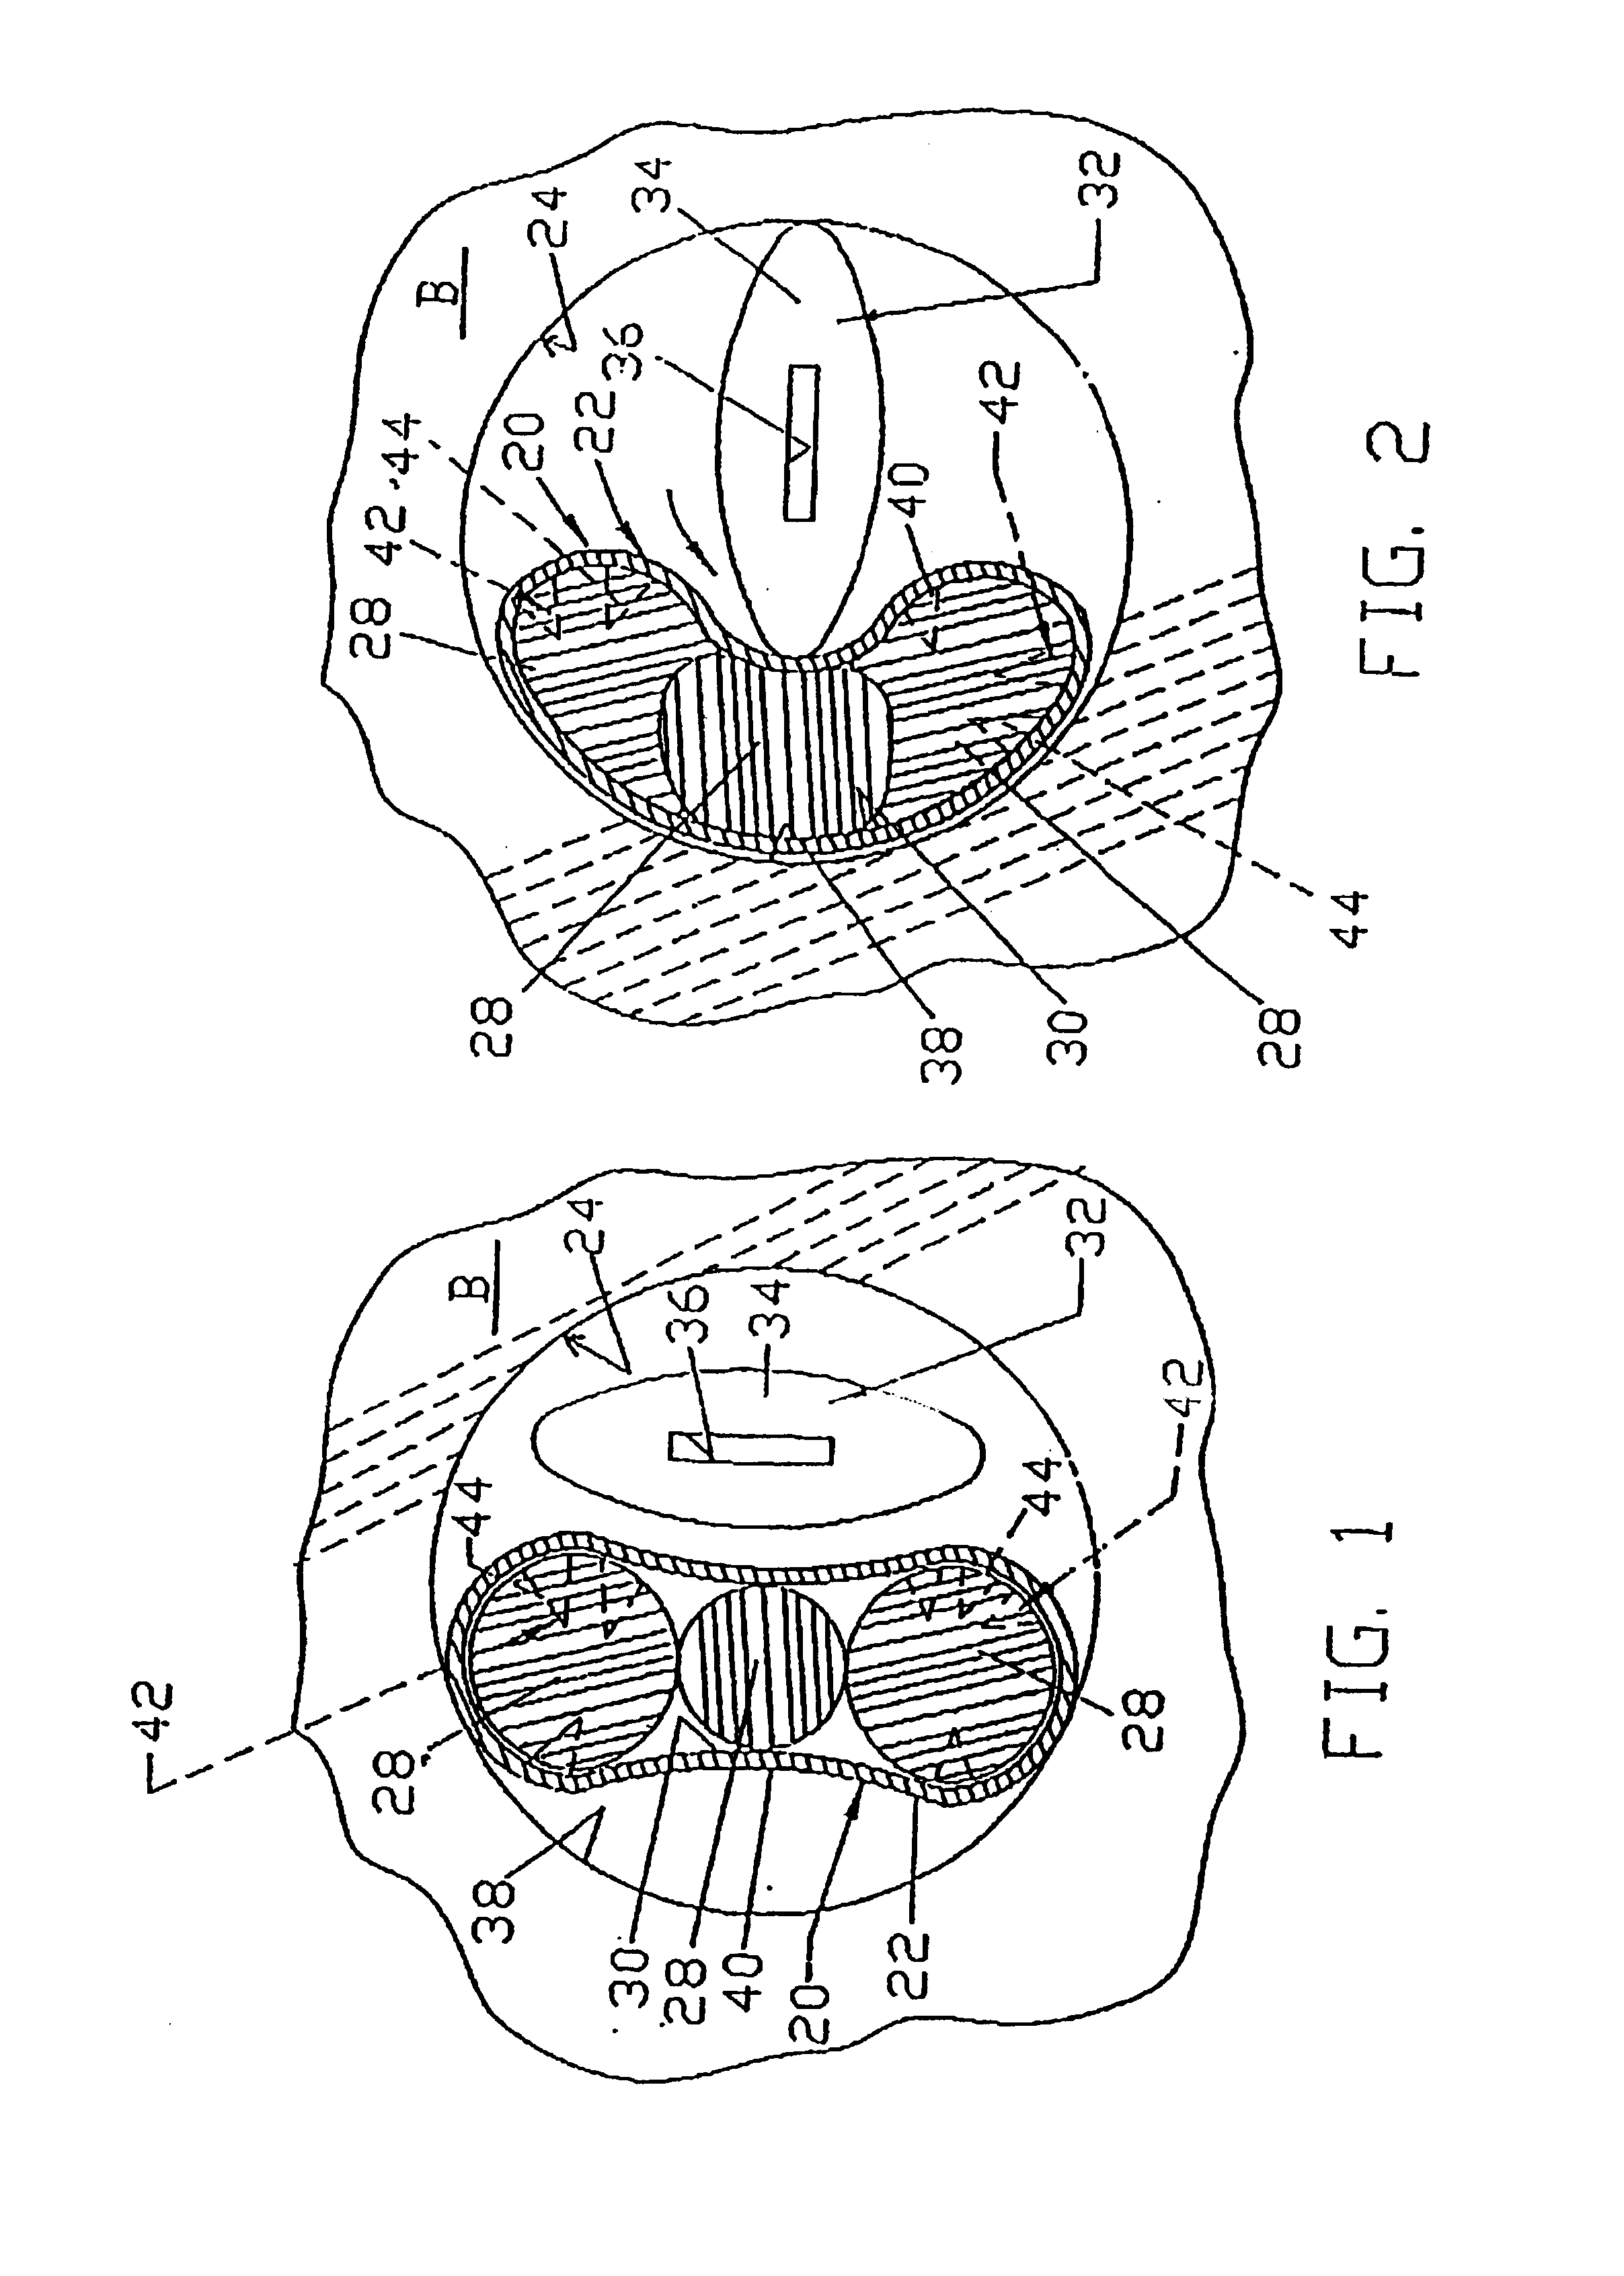 Graft ligament anchor and method for attaching a graft ligament to a bone